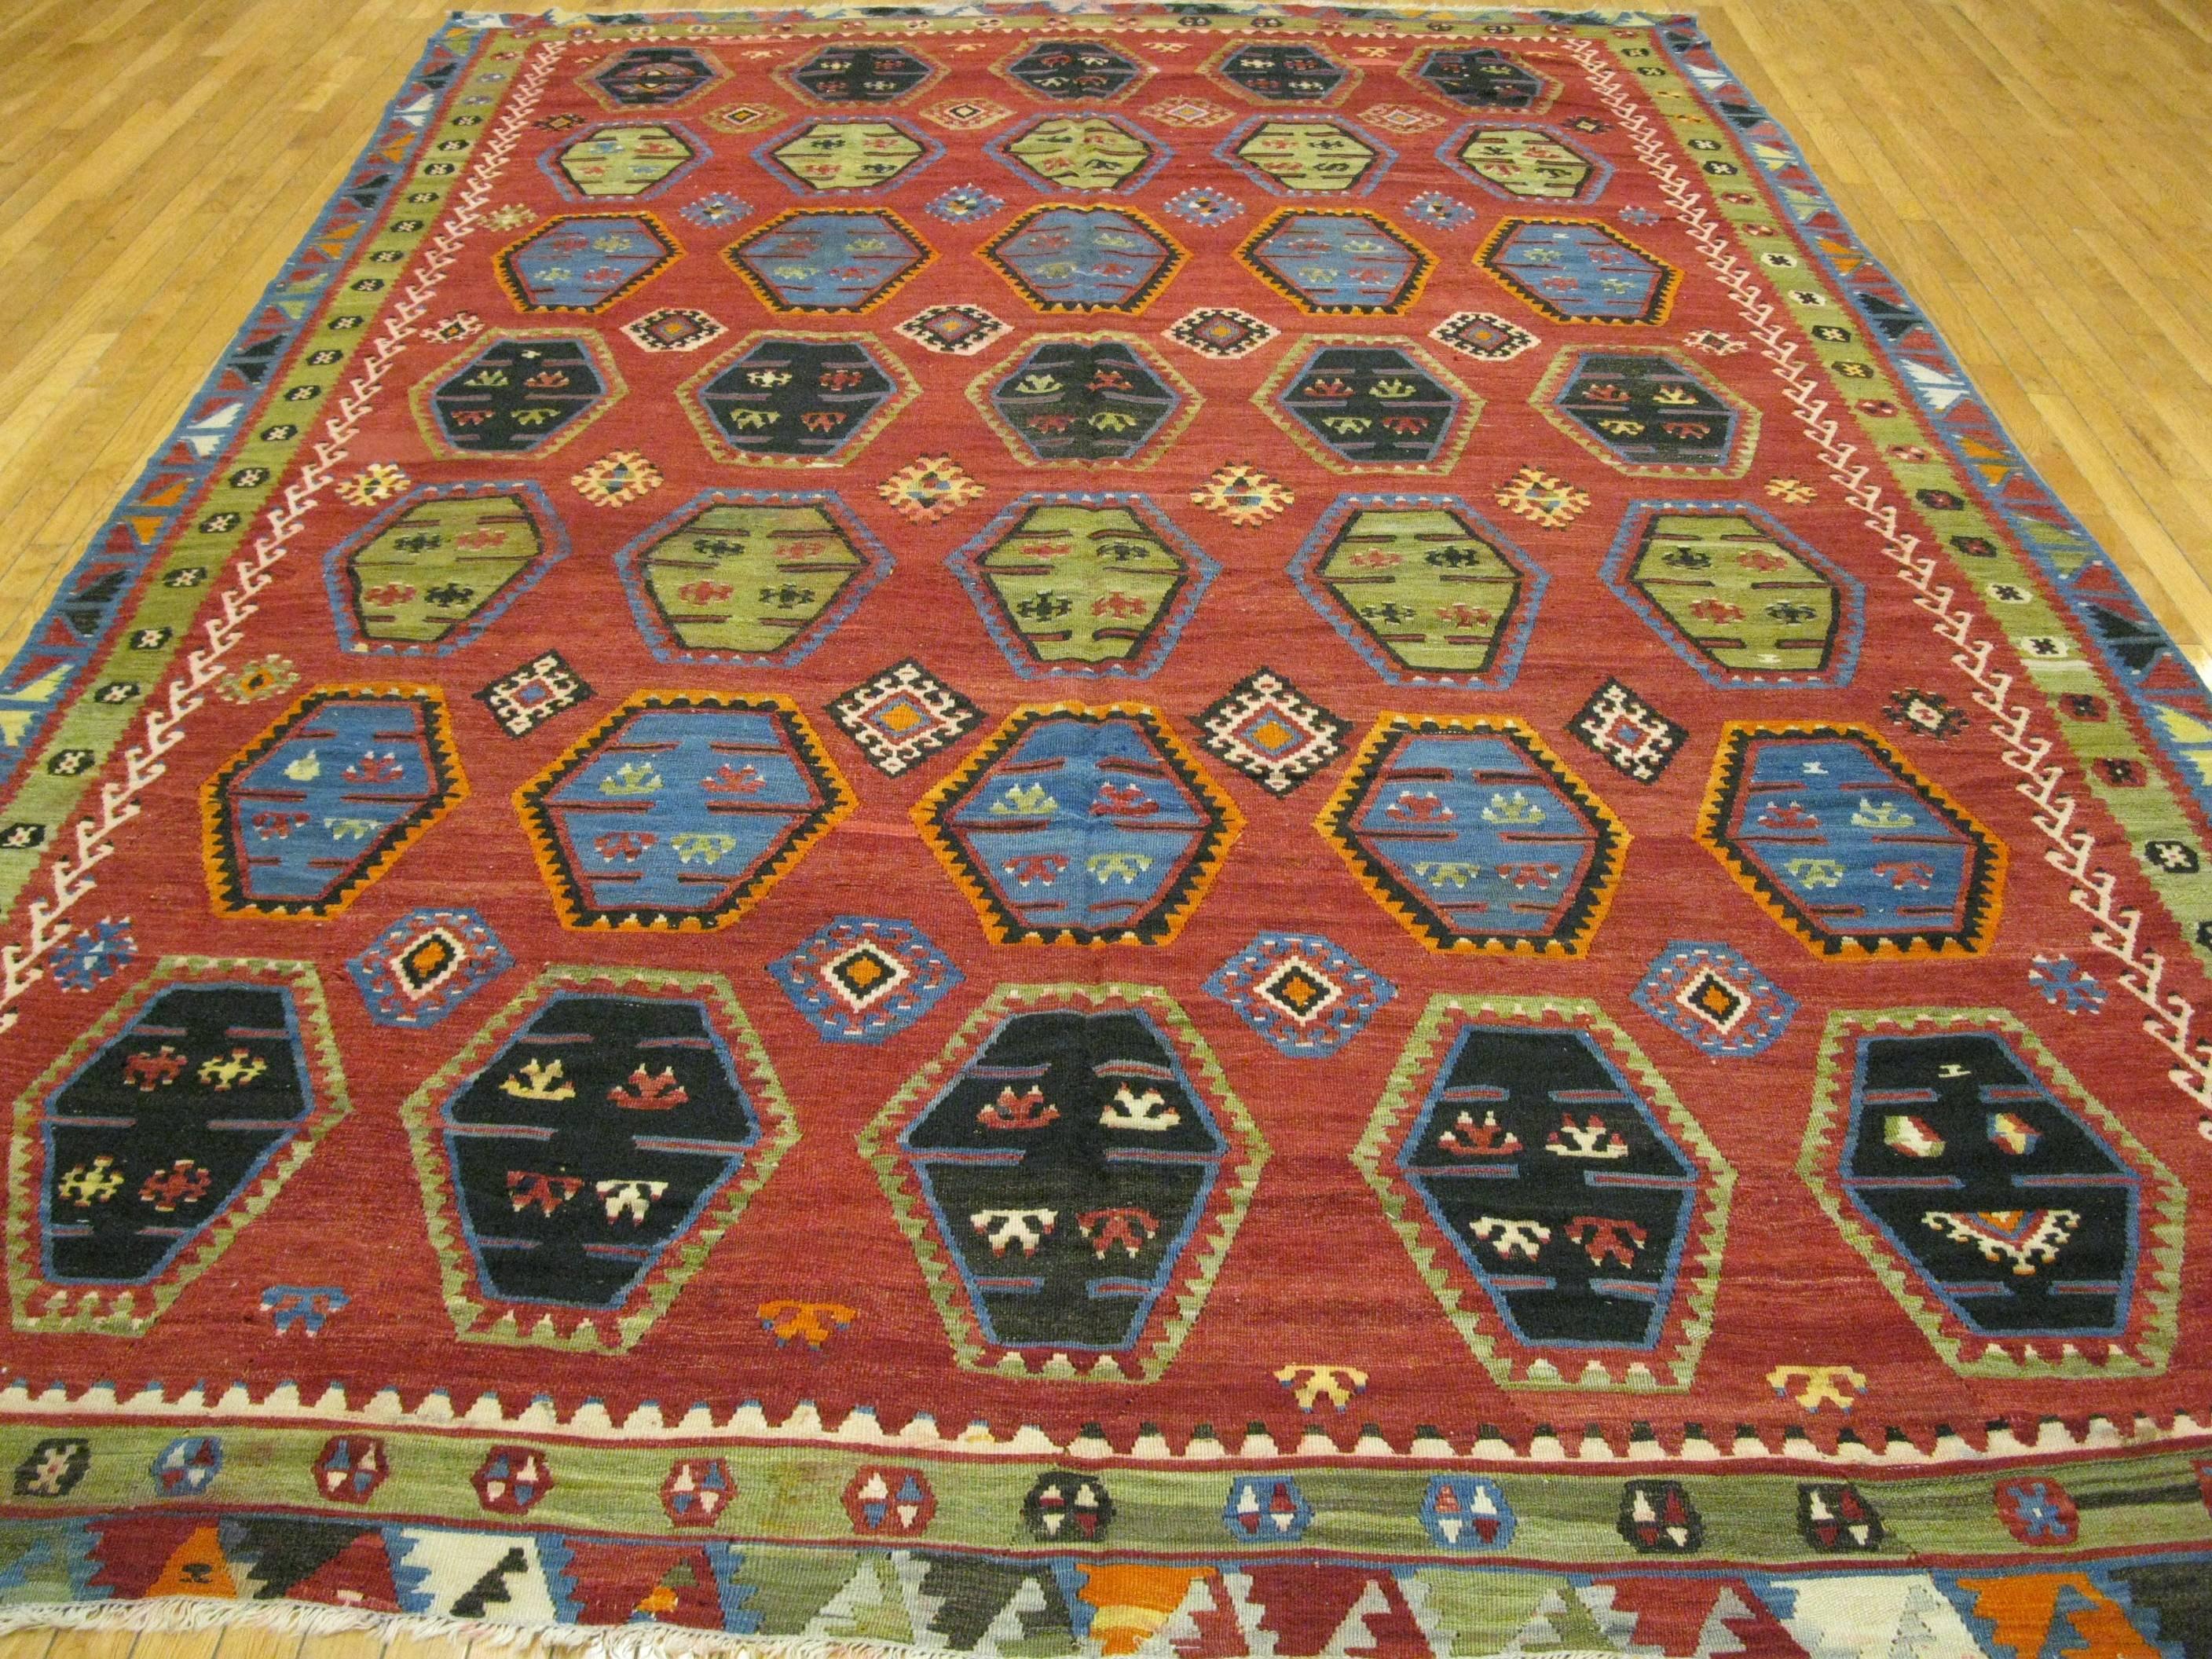 This is a beautiful vintage handwoven Caucasian Kazak design Kilim rug. The repetitive all-over medallions have created a balanced and easy design to work with. It is reversible and both sides of the rug can be used. It is made with all wool and